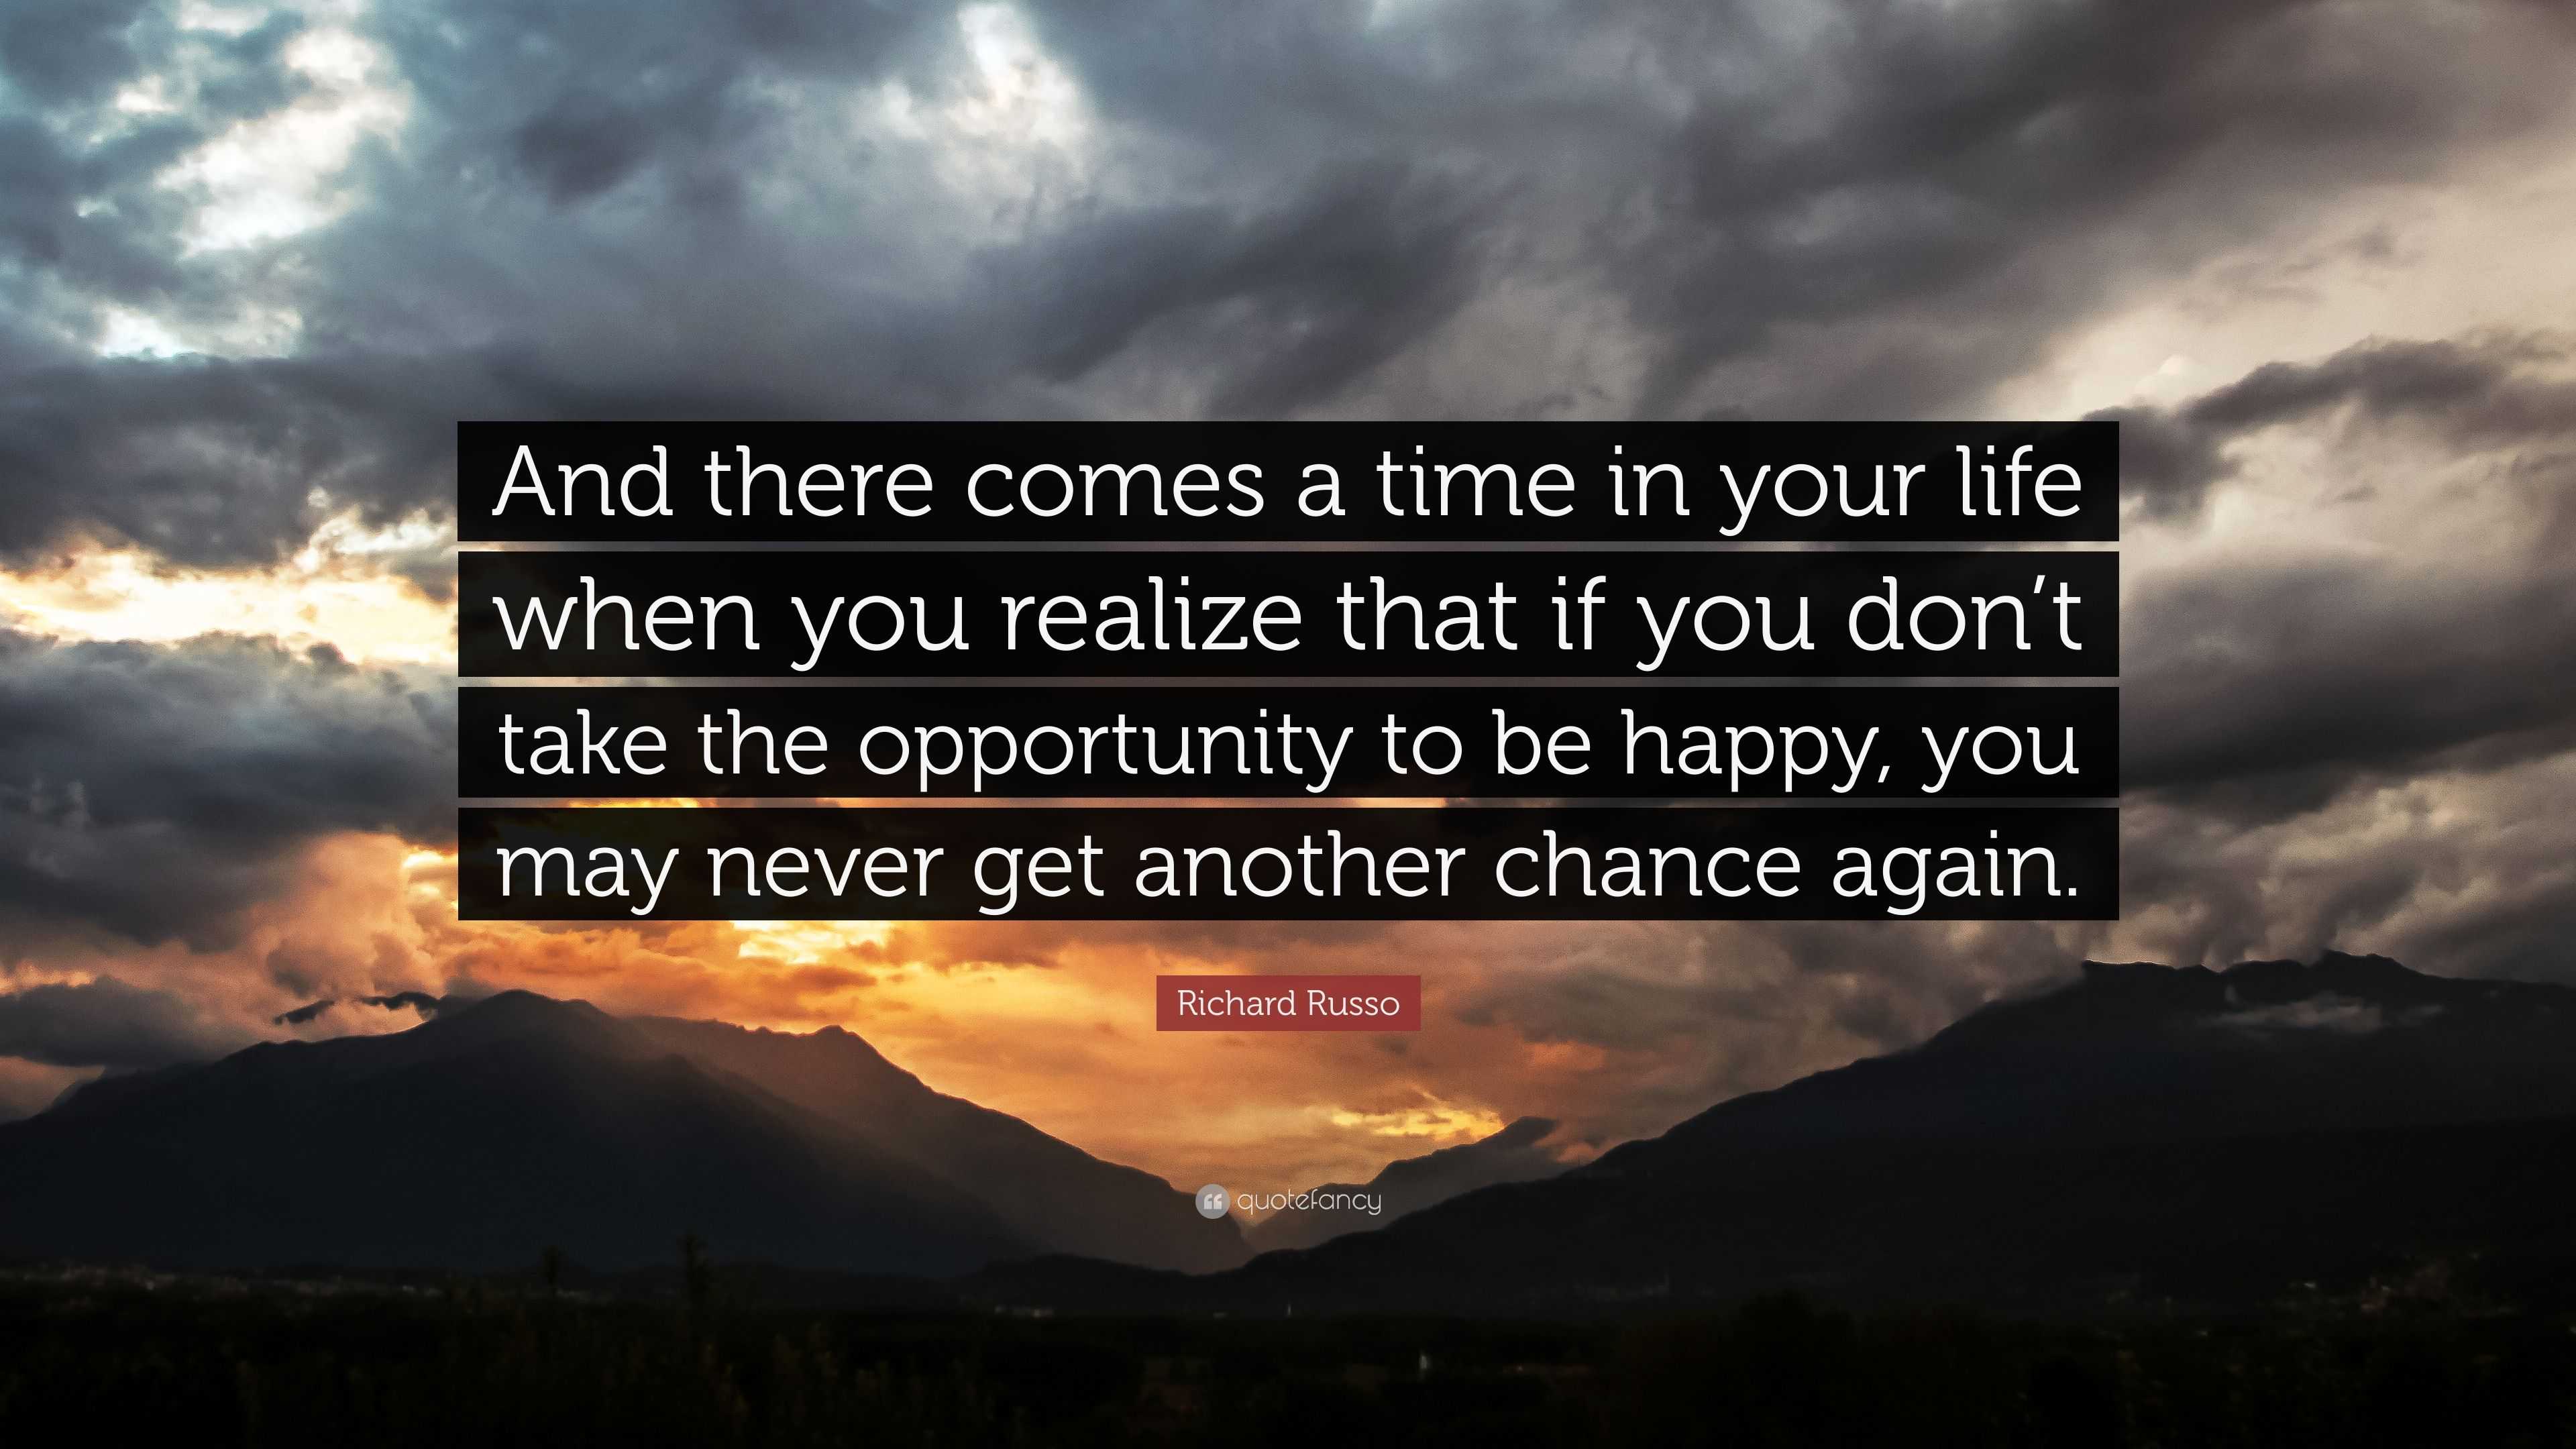 Richard Russo Quote: “And there comes a time in your life when you ...